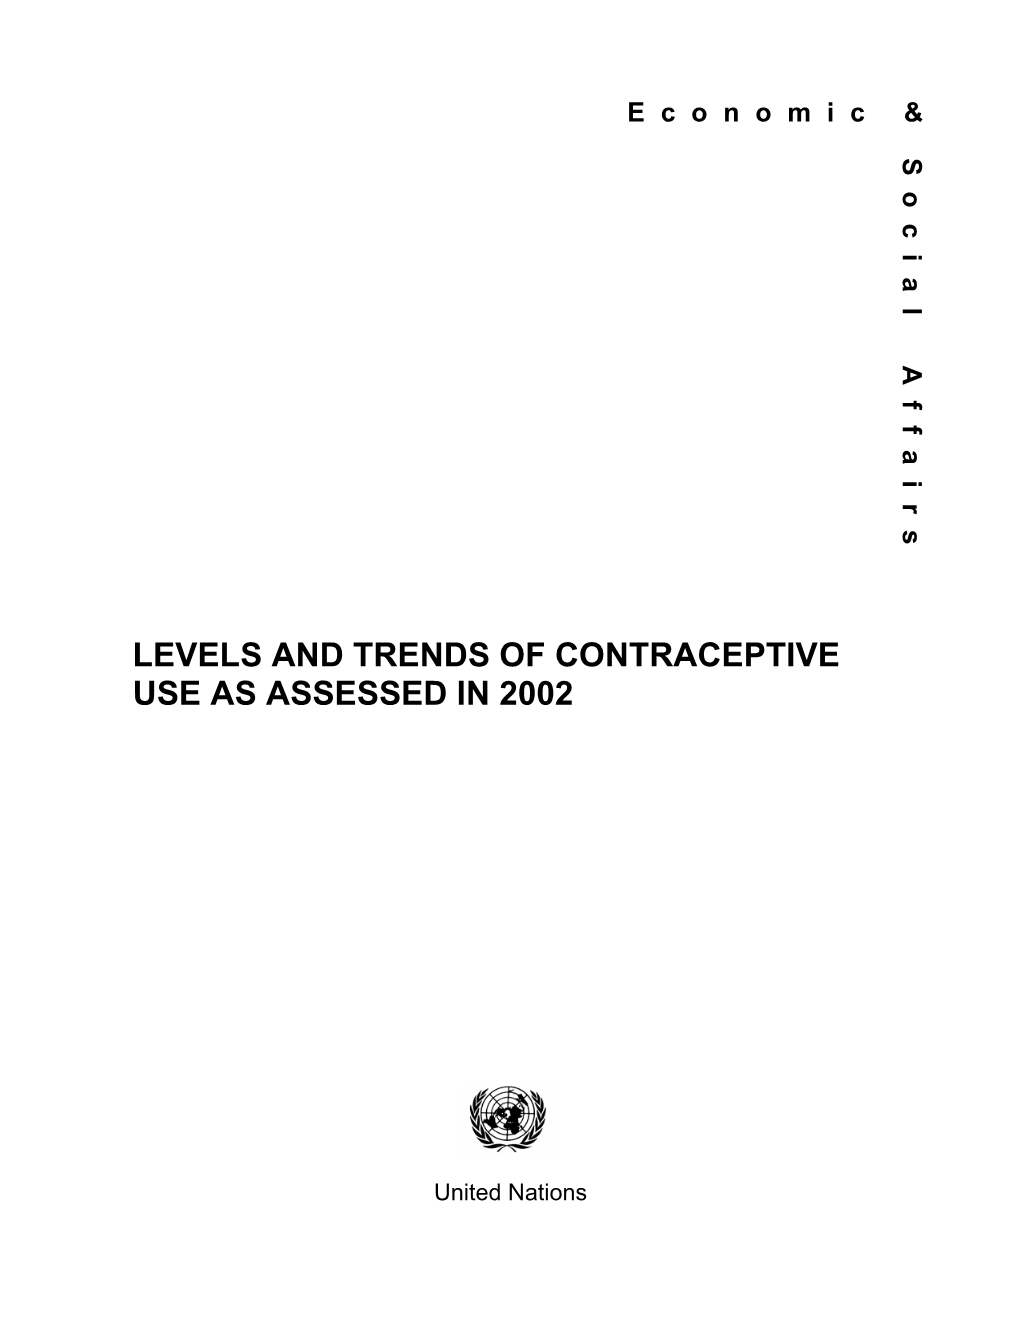 Levels and Trends of Contraceptive Use As Assessed in 2002